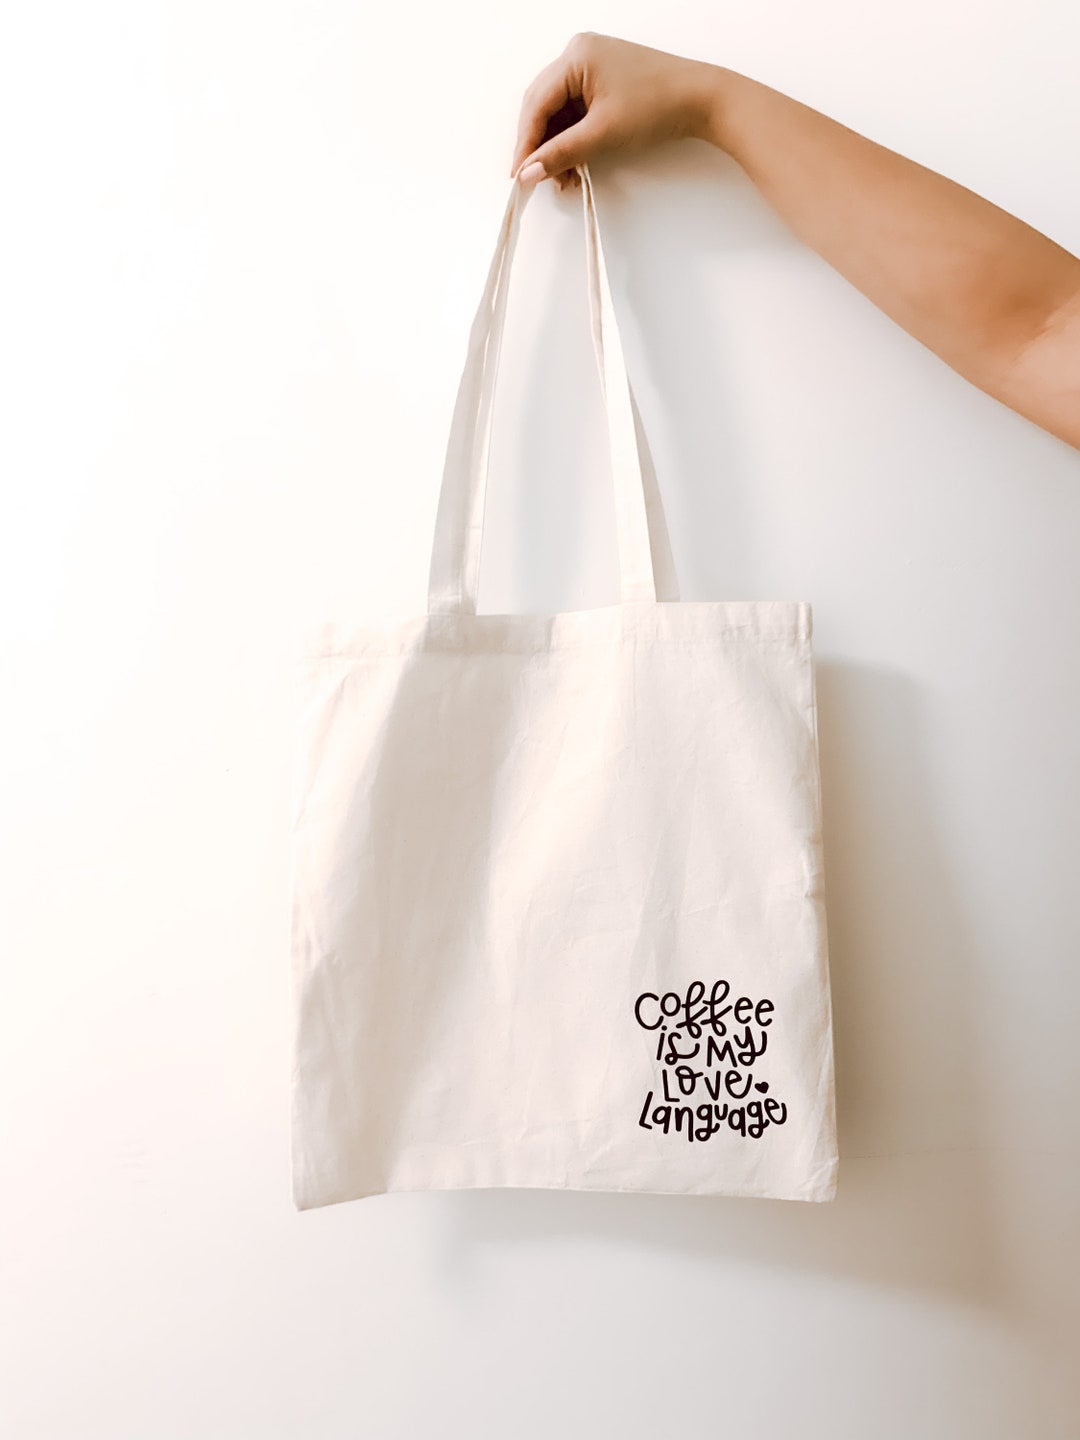 Coffee Inspired Canvas Tote Bag // 100% Cotton Hand Made - Etsy